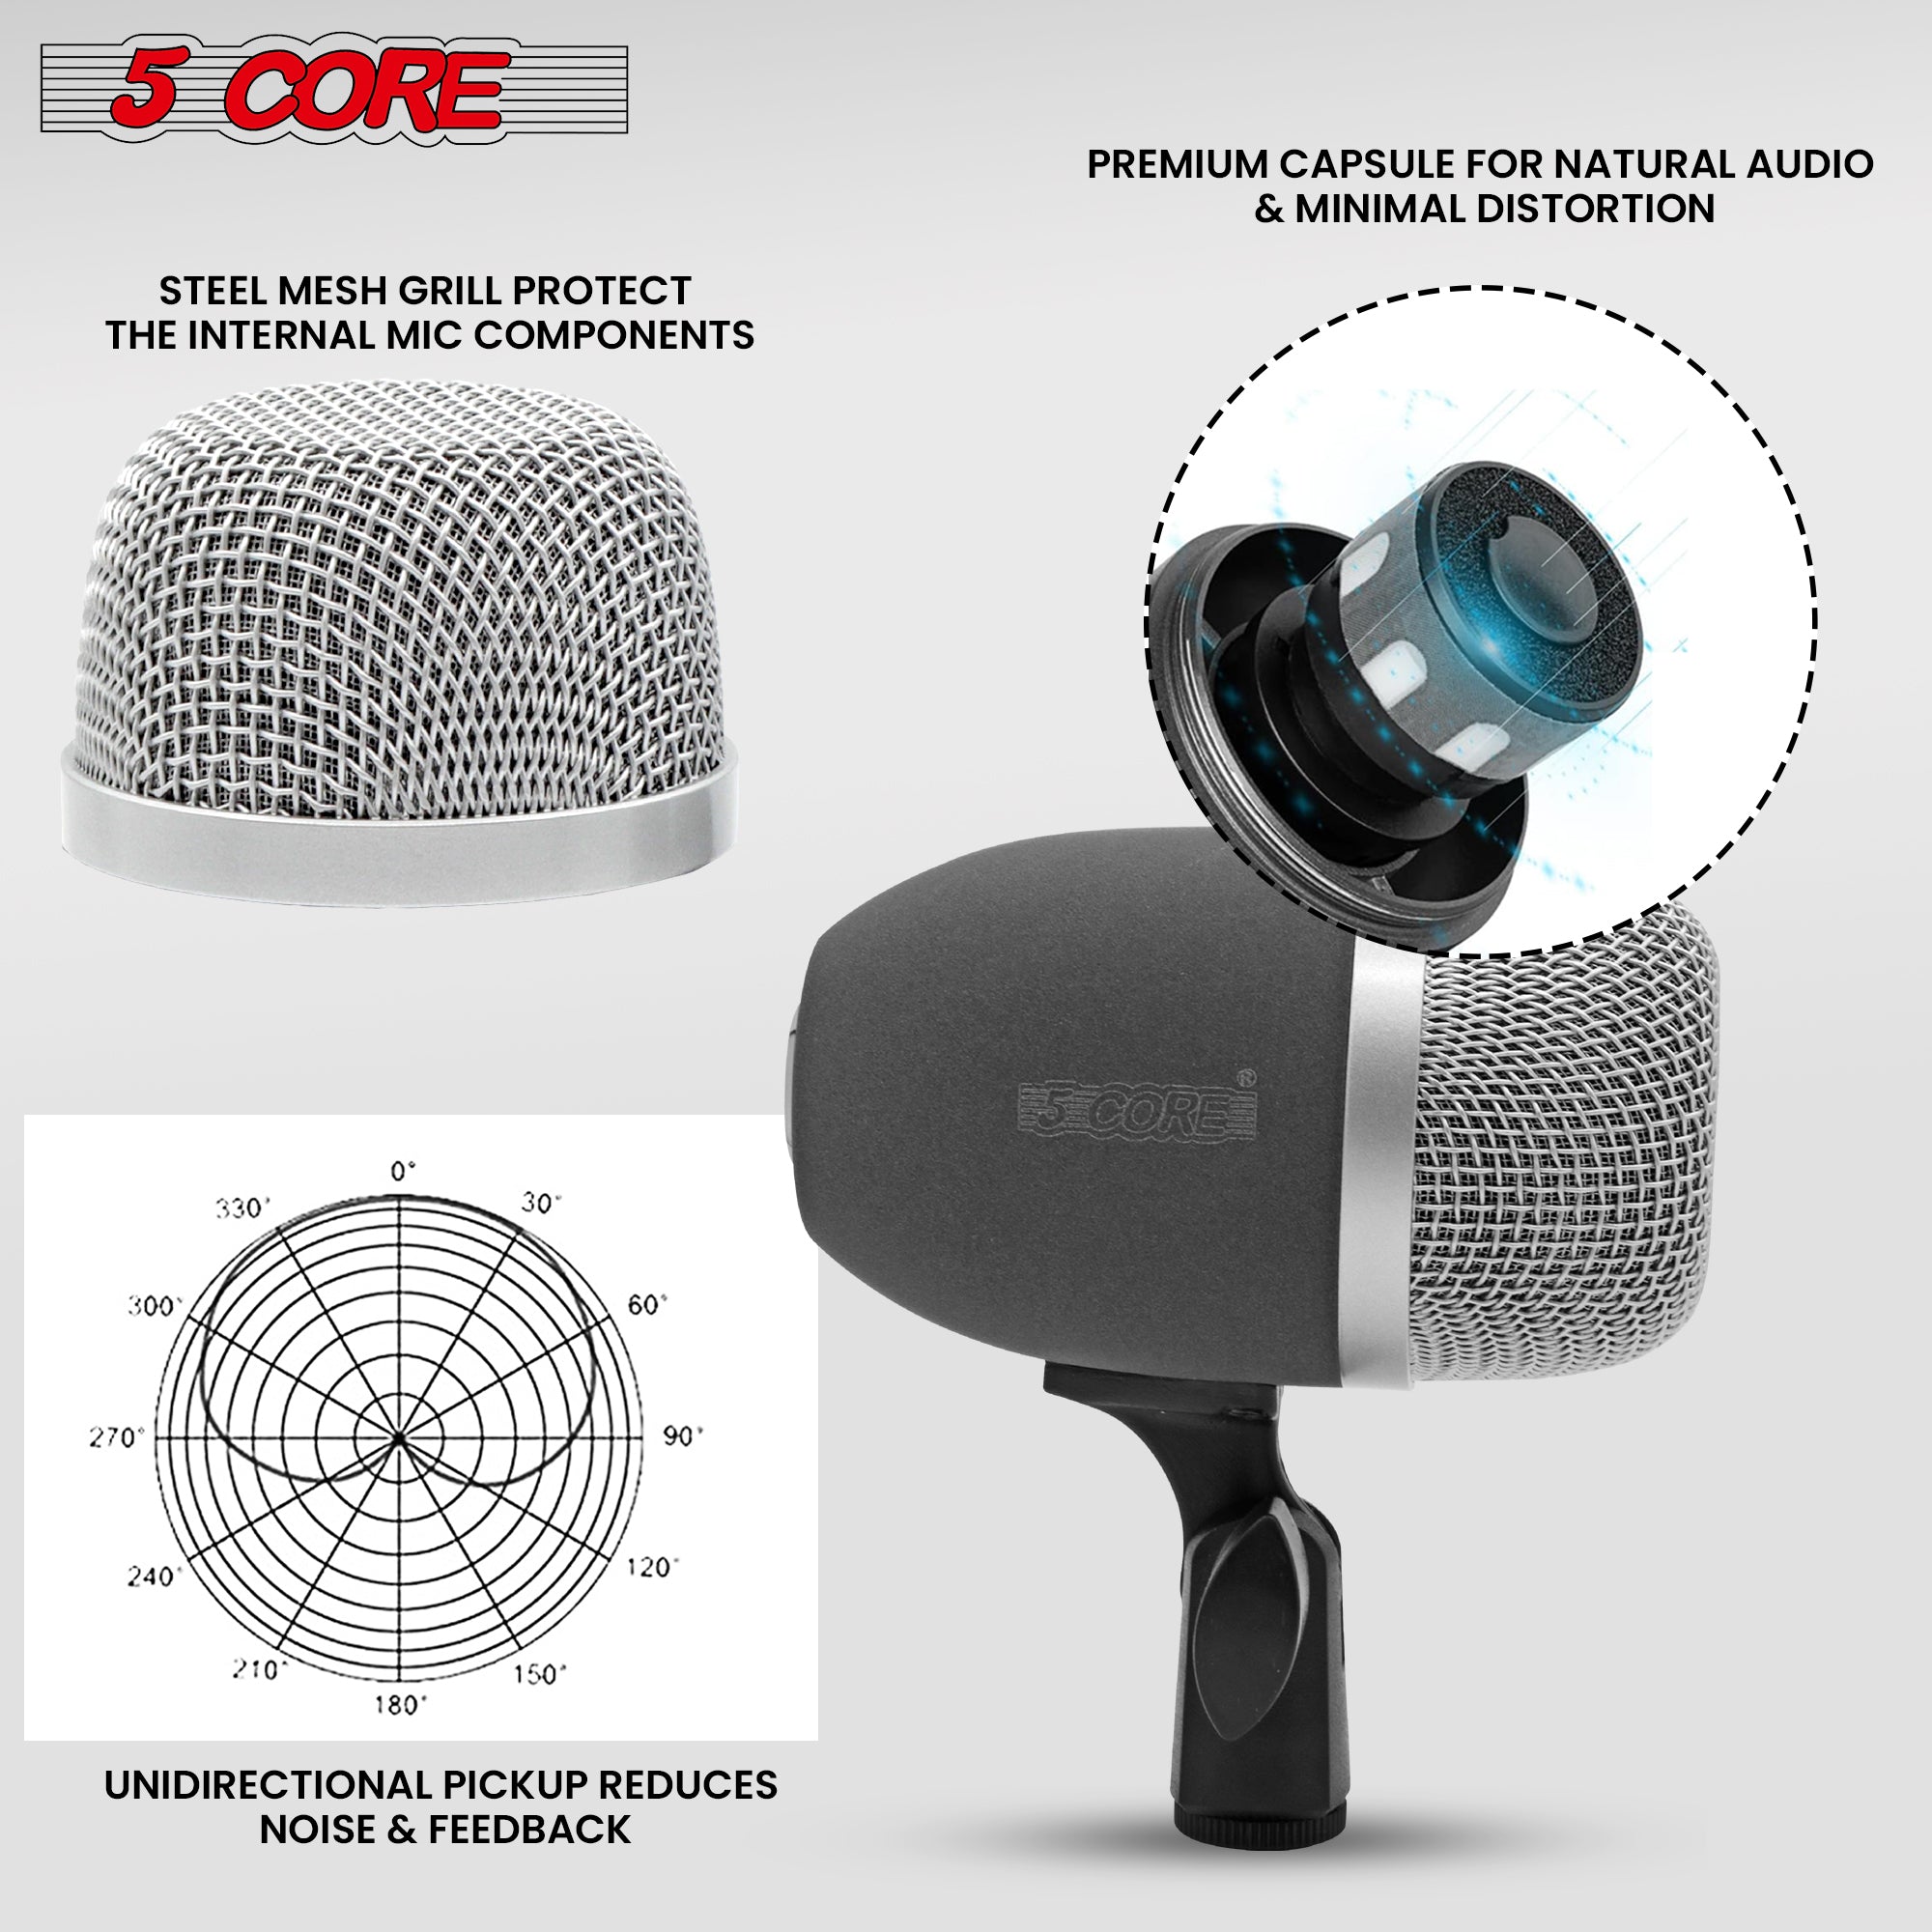 5 Core Conga Mic Set with Tom Snare Condenser Microphone Professional Cardioid Dynamic Instrument Mic Unidirectional Pickup for Close Miking - CONGO 3XP